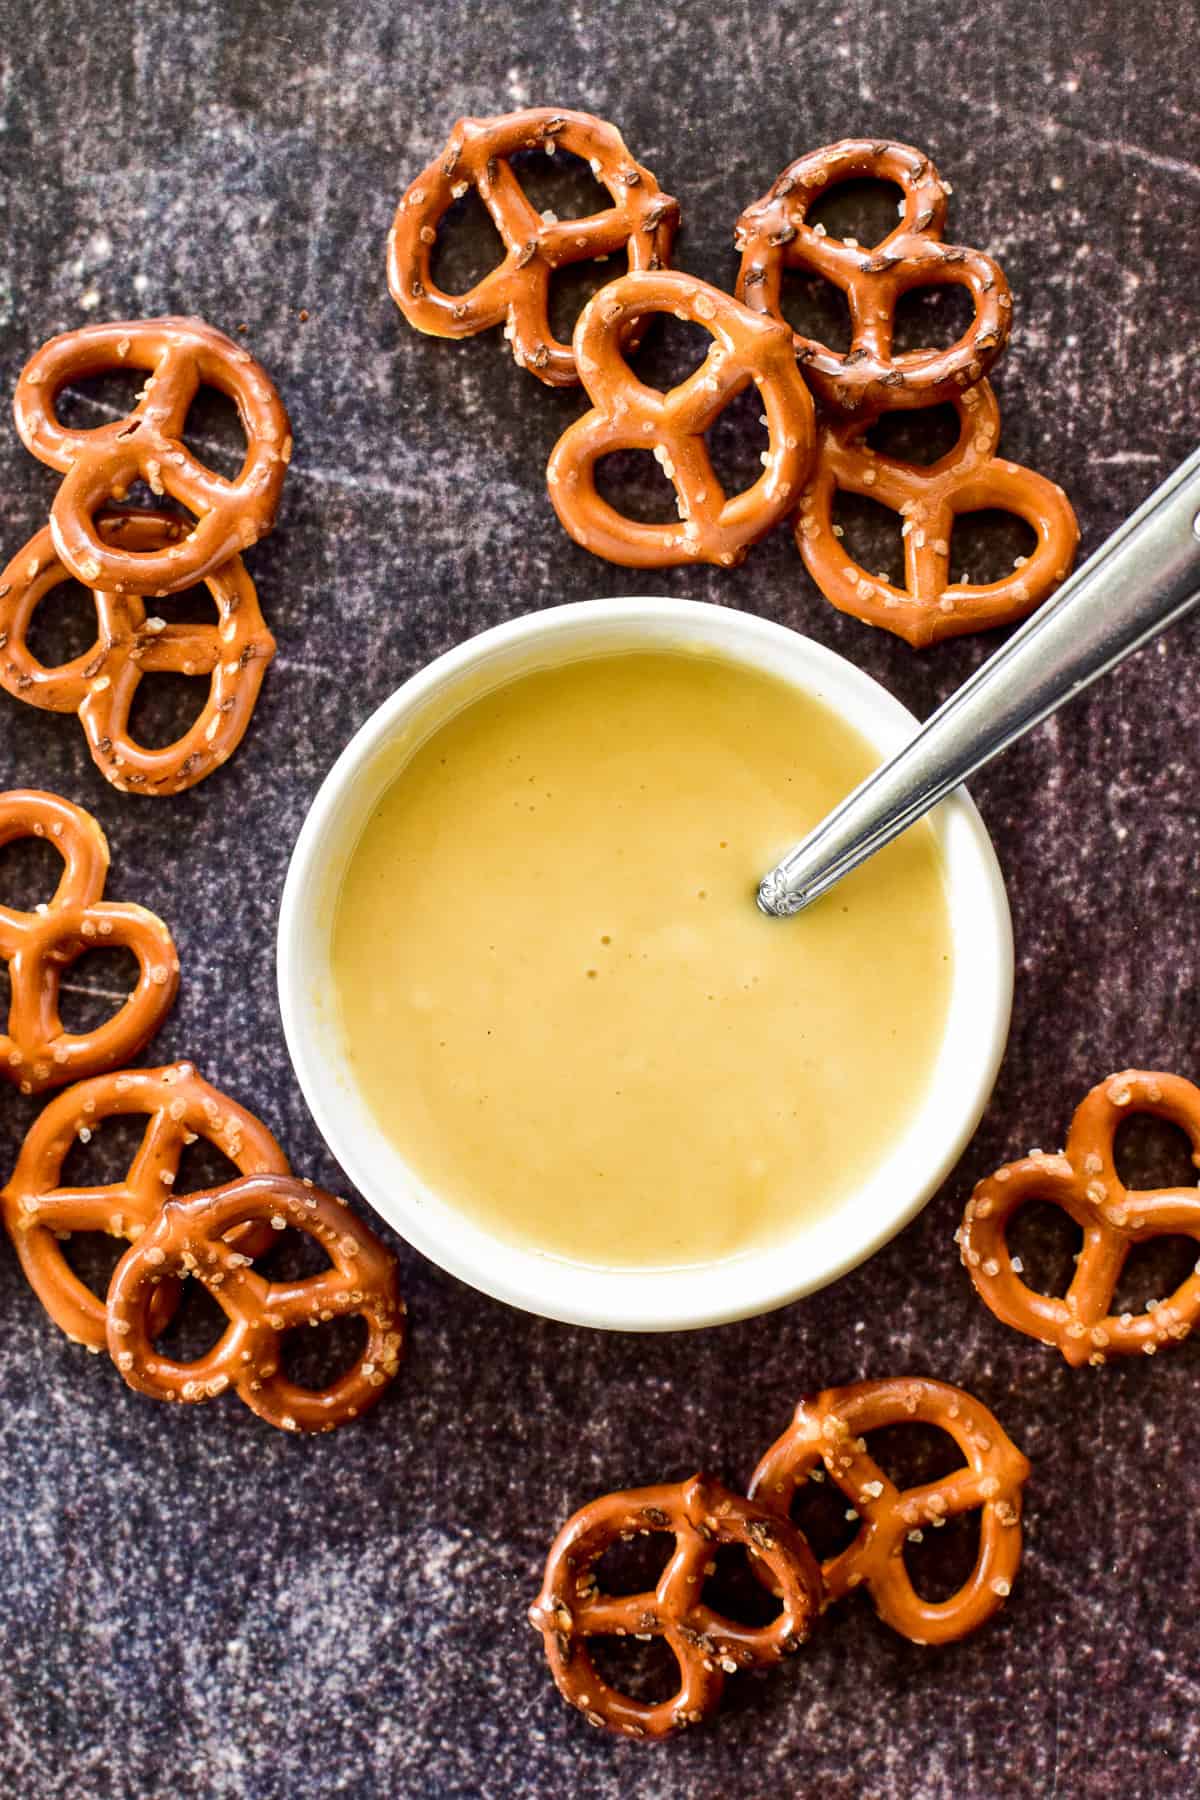 Basic Honey Mustard in a bowl with pretzels